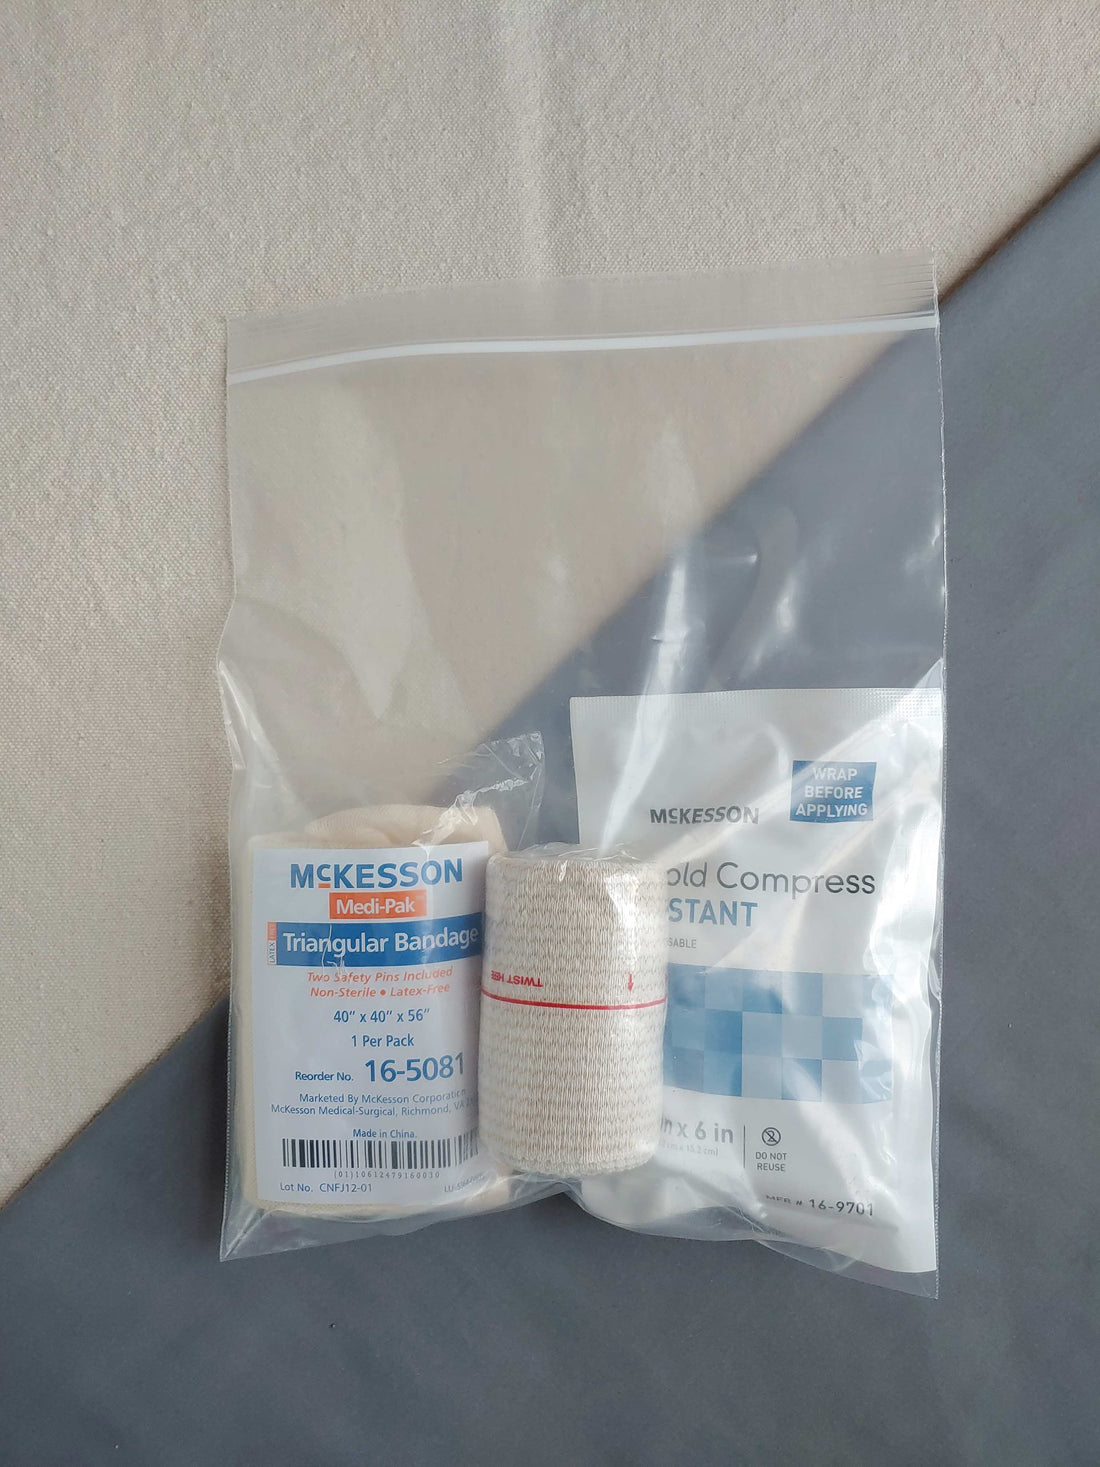 First aid kit refill containing ice pack elastic bandage and triangle bandage in baggie